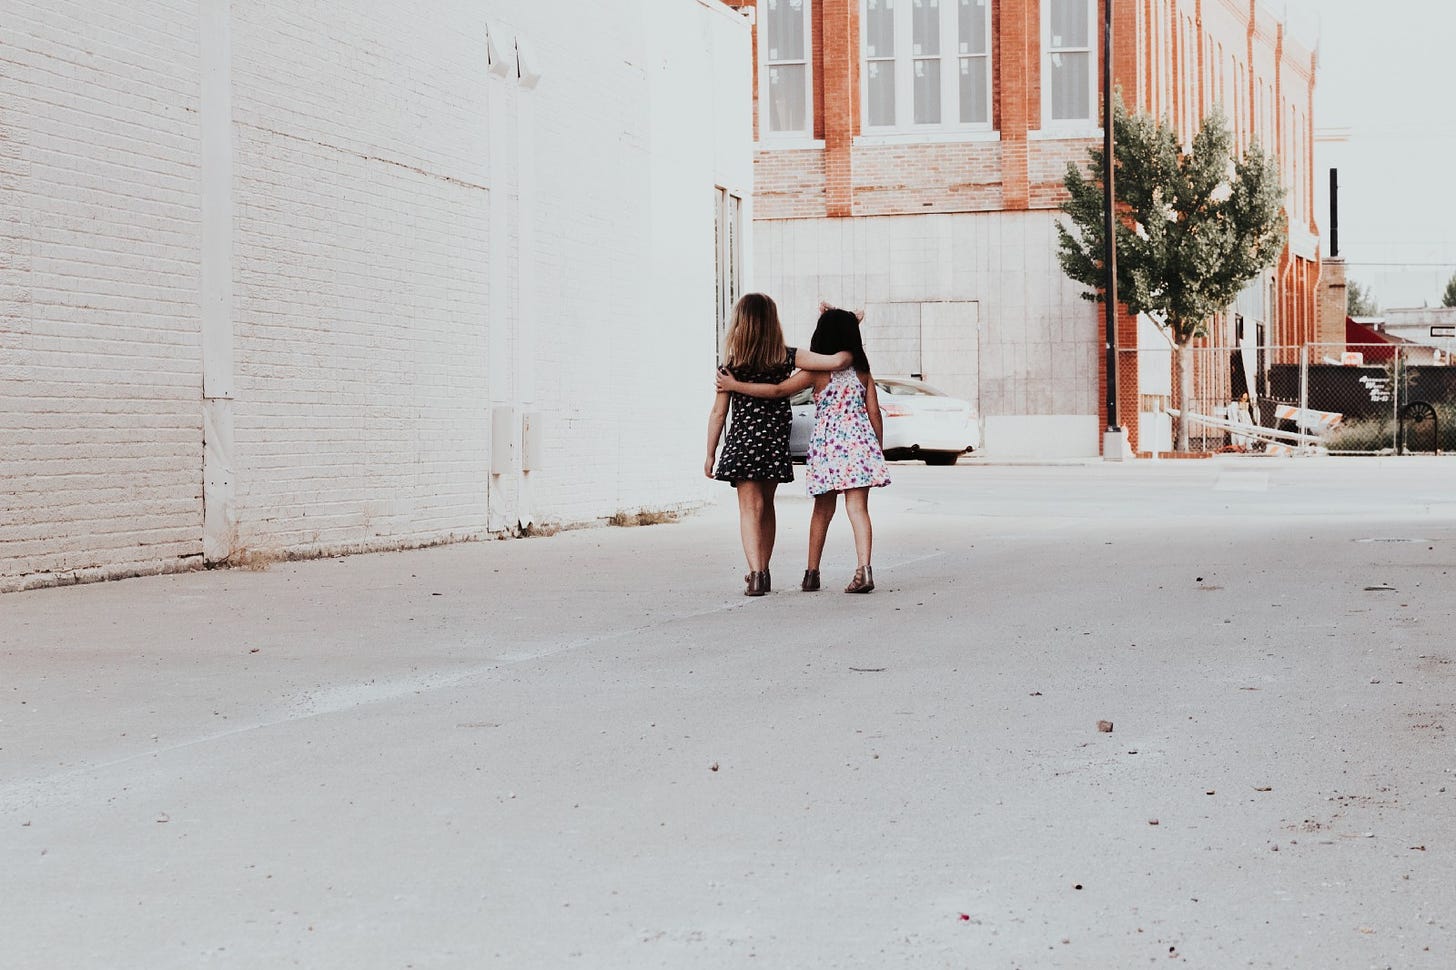 Two little girls in cute dresses walk arm and arm down a city alley.